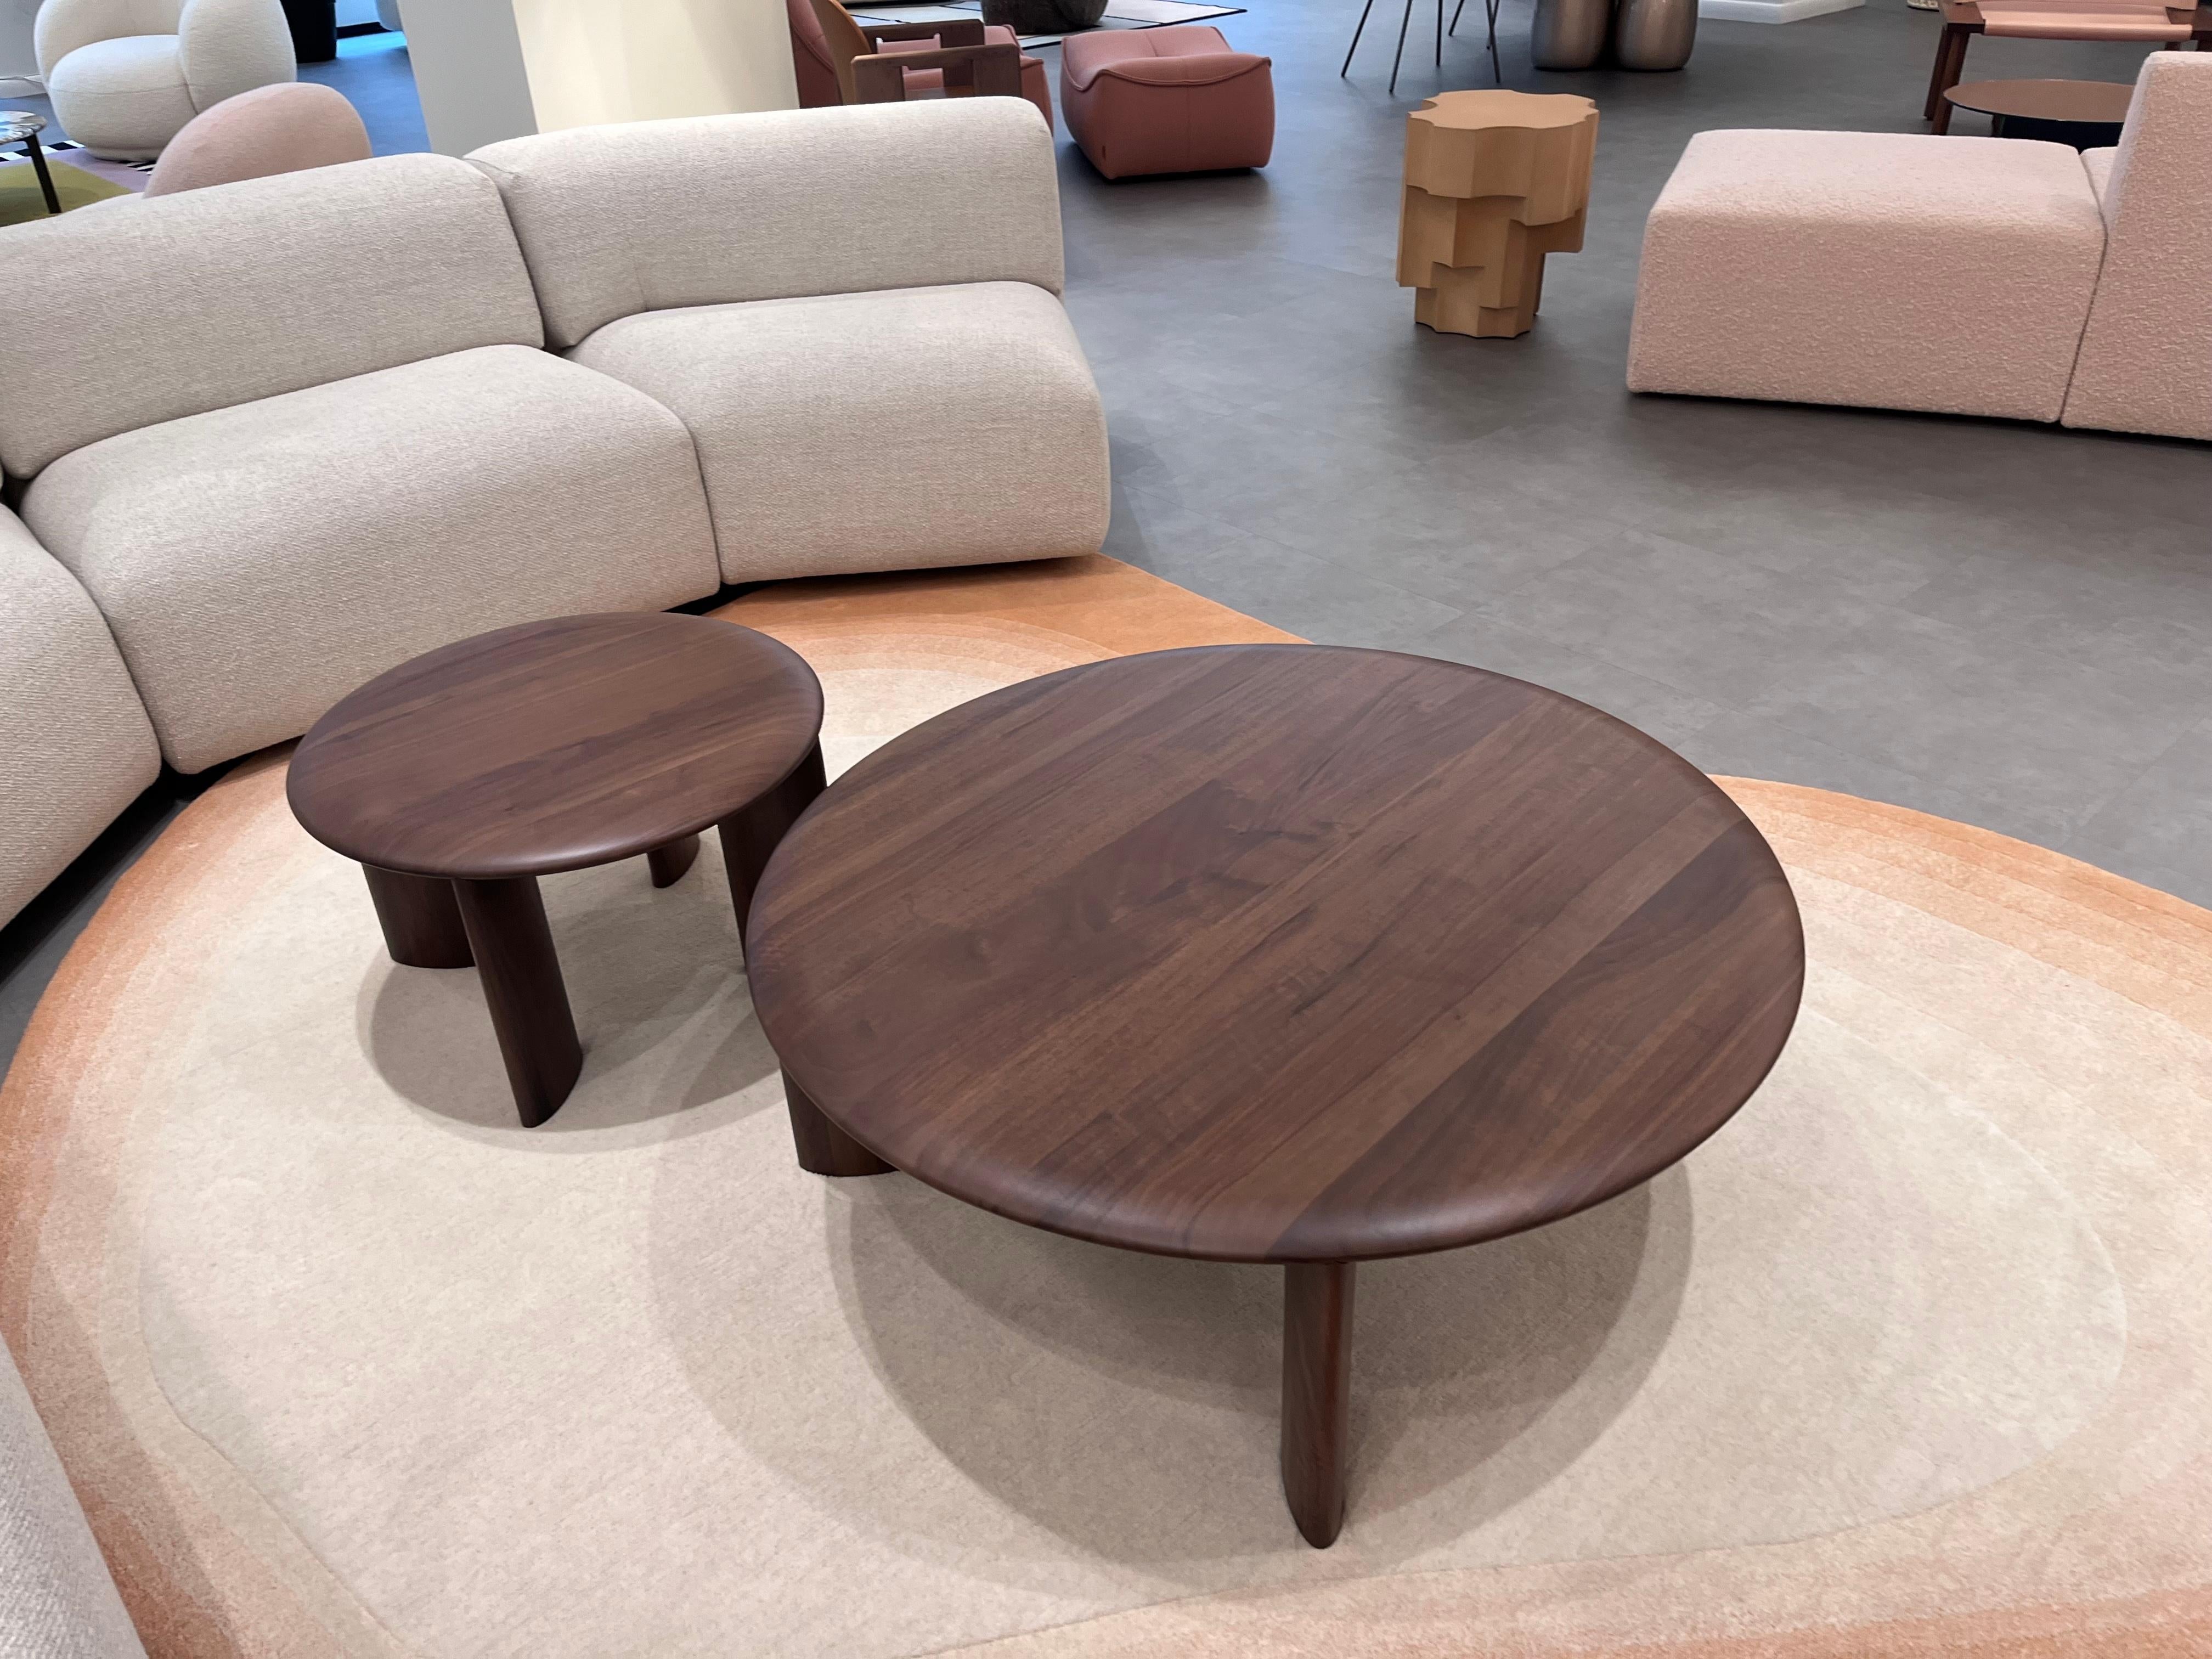 IO WALNUT COFFEE TABLE 1000MM & IO WALNUT SIDE TABLE

Designed in 2020 by Lars Beller Fejtland, the IO COFFEE TABLE is a mid-sized coffee table from the IO COLLECTION — a standout, well-constructed centerpiece with generous curves and a soothing